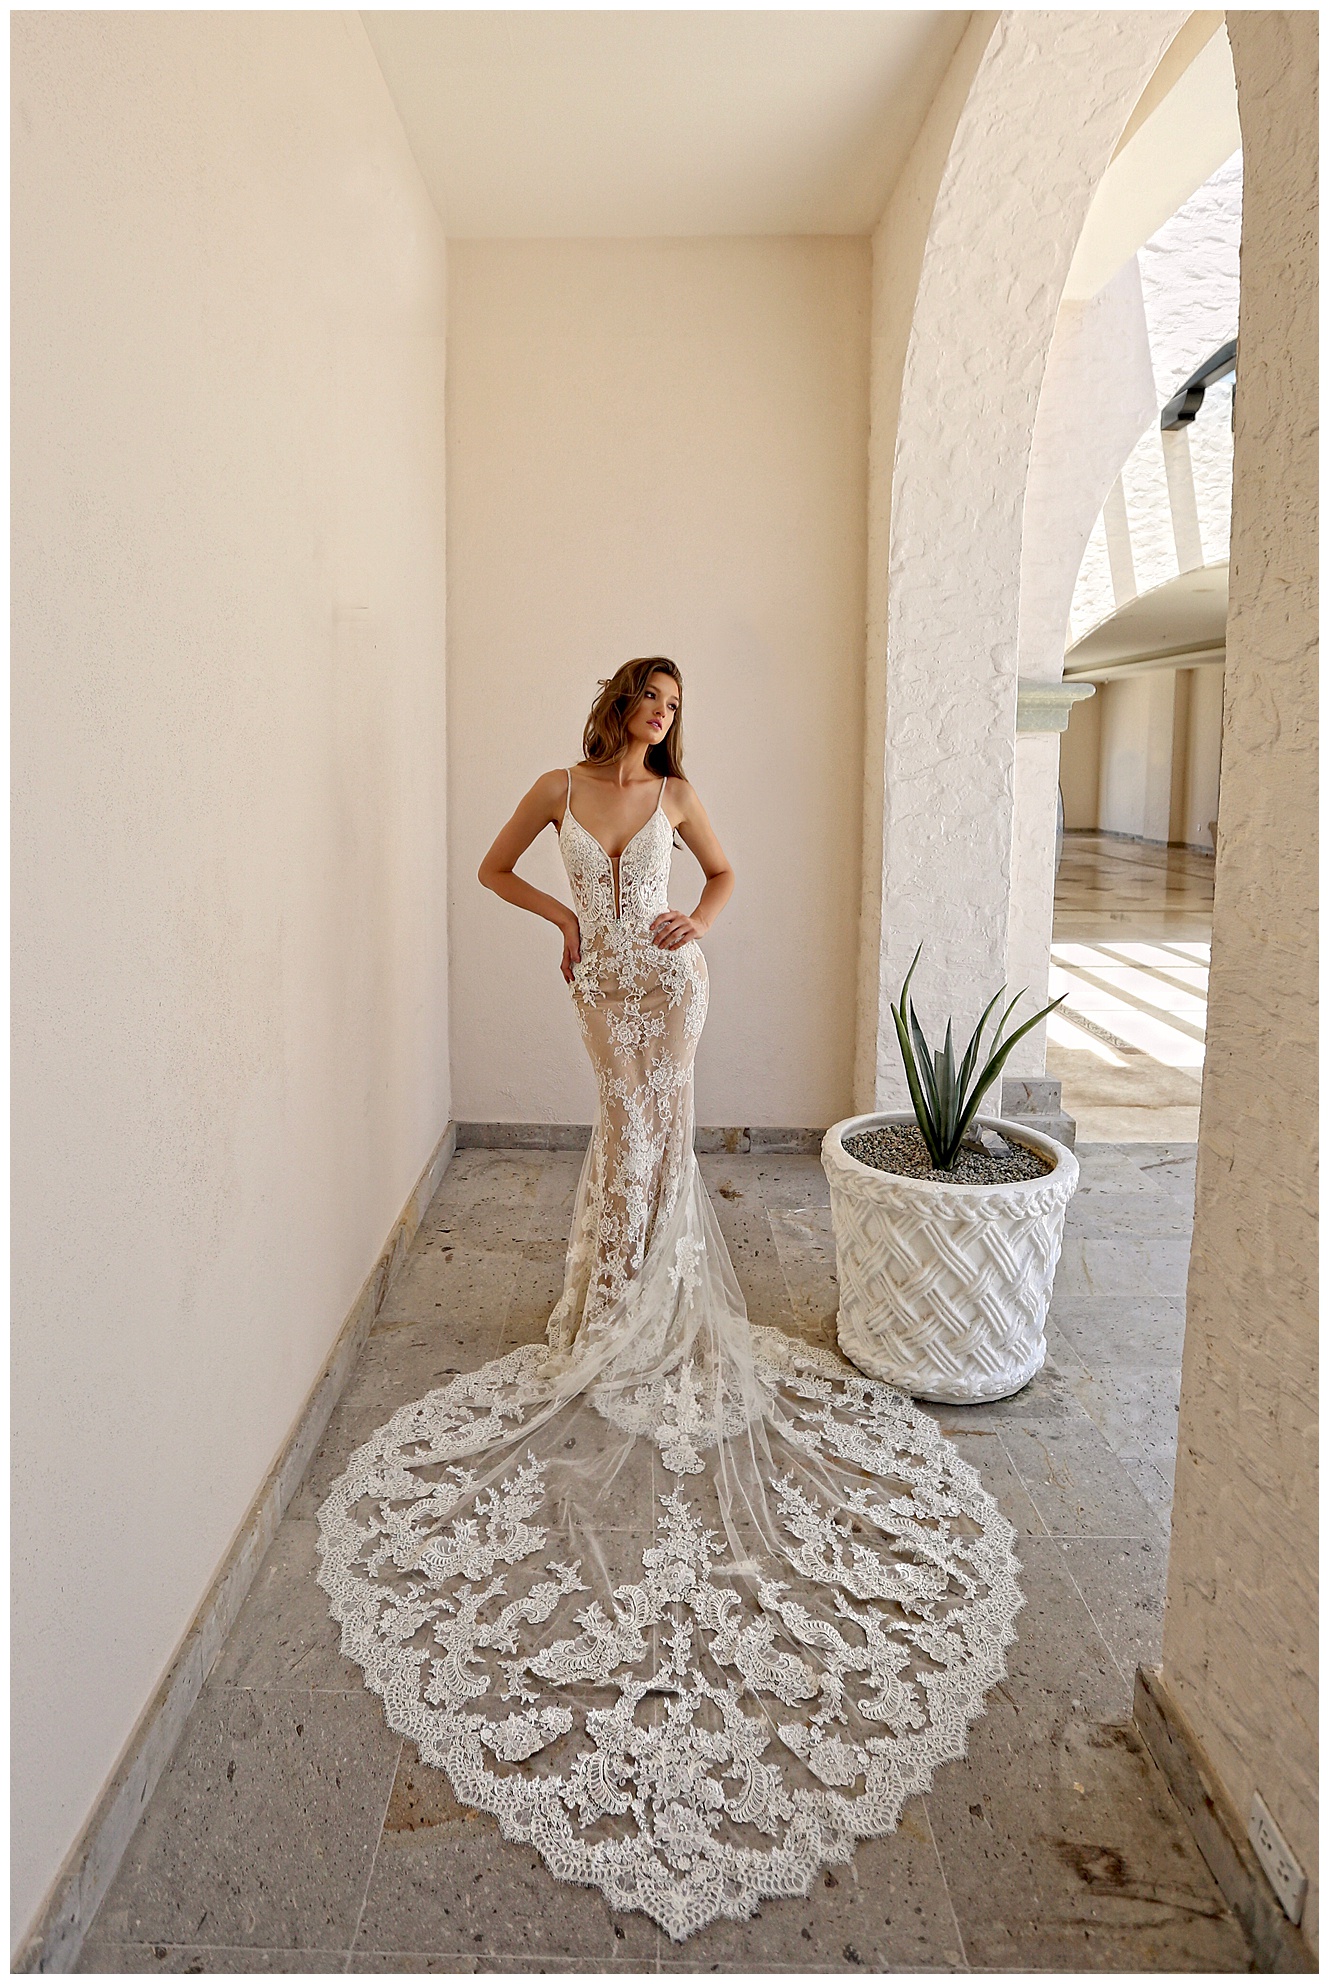 The Allure of Lace in Modern Wedding Dress Trends